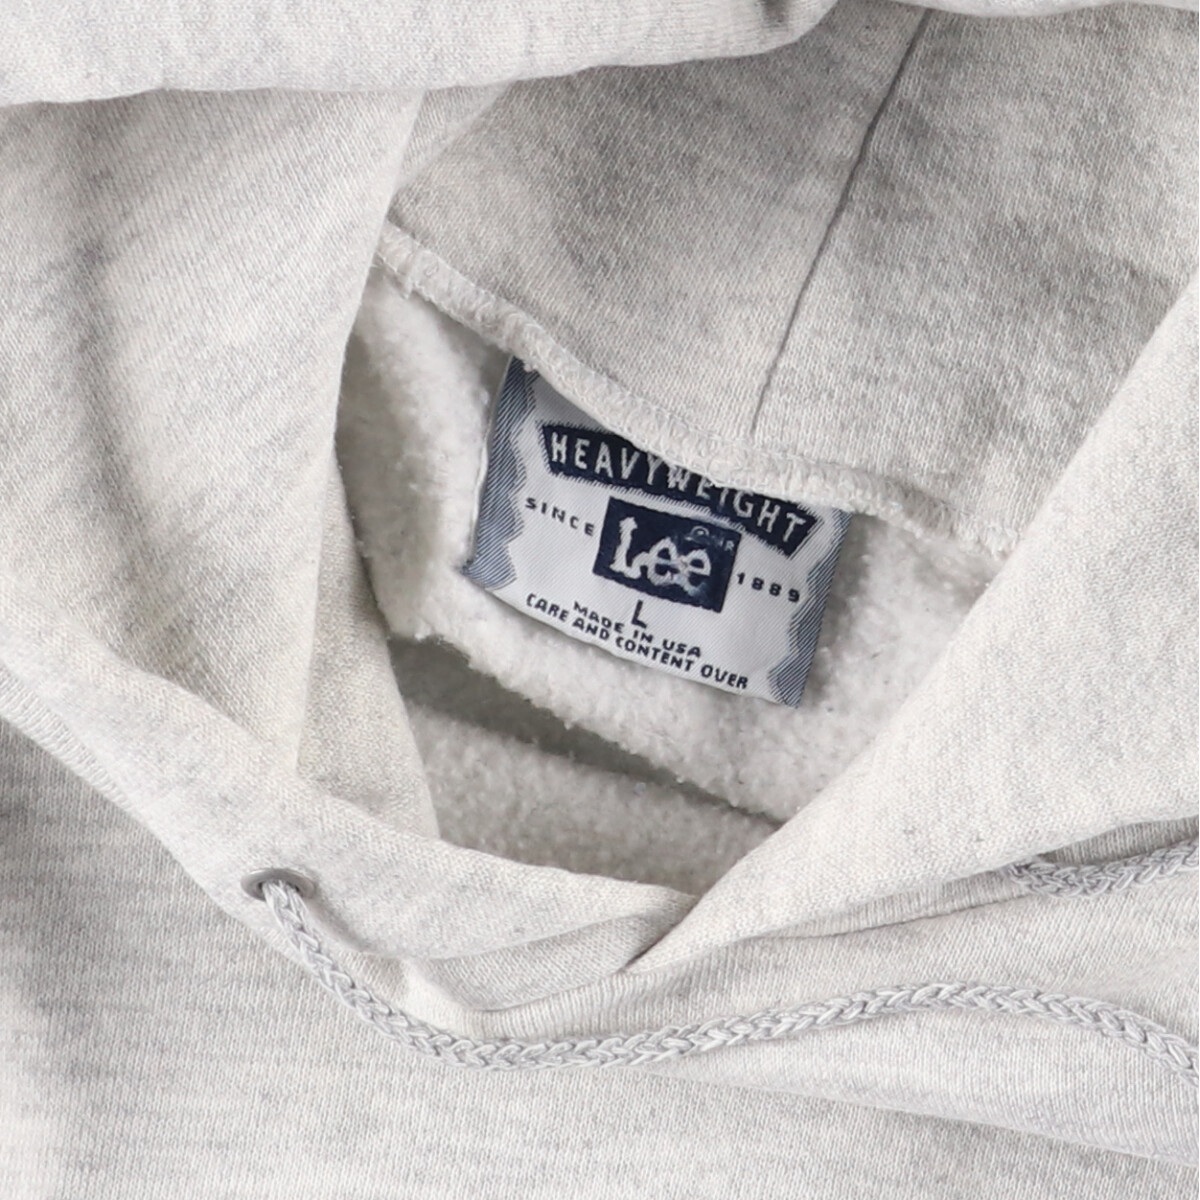  old clothes 90 period Lee Lee back print sweat pull over Parker USA made men's L Vintage /eaa409893